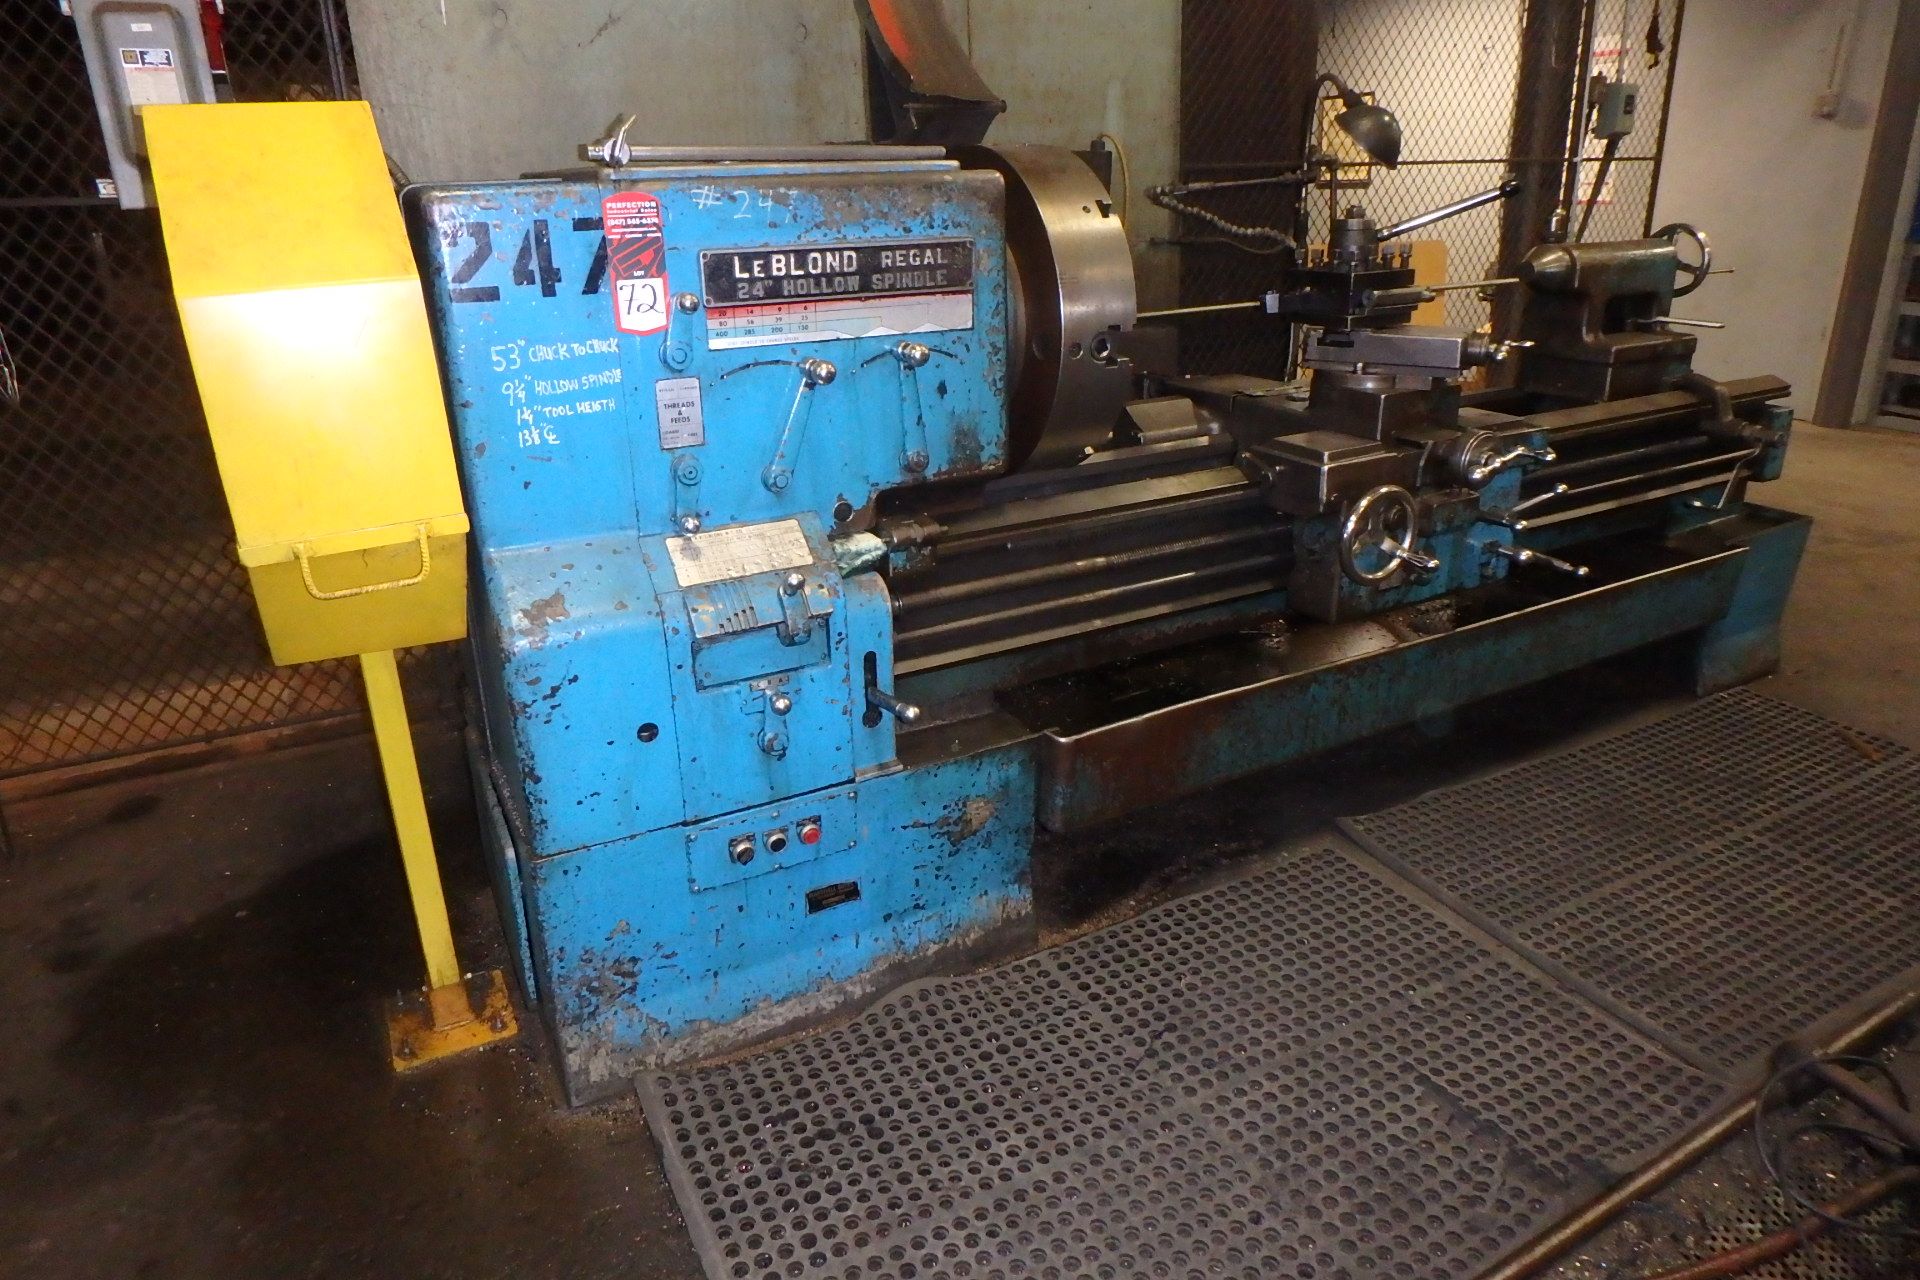 LEBLOND REGAL 28" x 60" Hollow Spindle Lathe, s/n 2H599, w/ 9" Spindle Hole, 24" 4-Jaw Chuck, 9- - Image 2 of 4